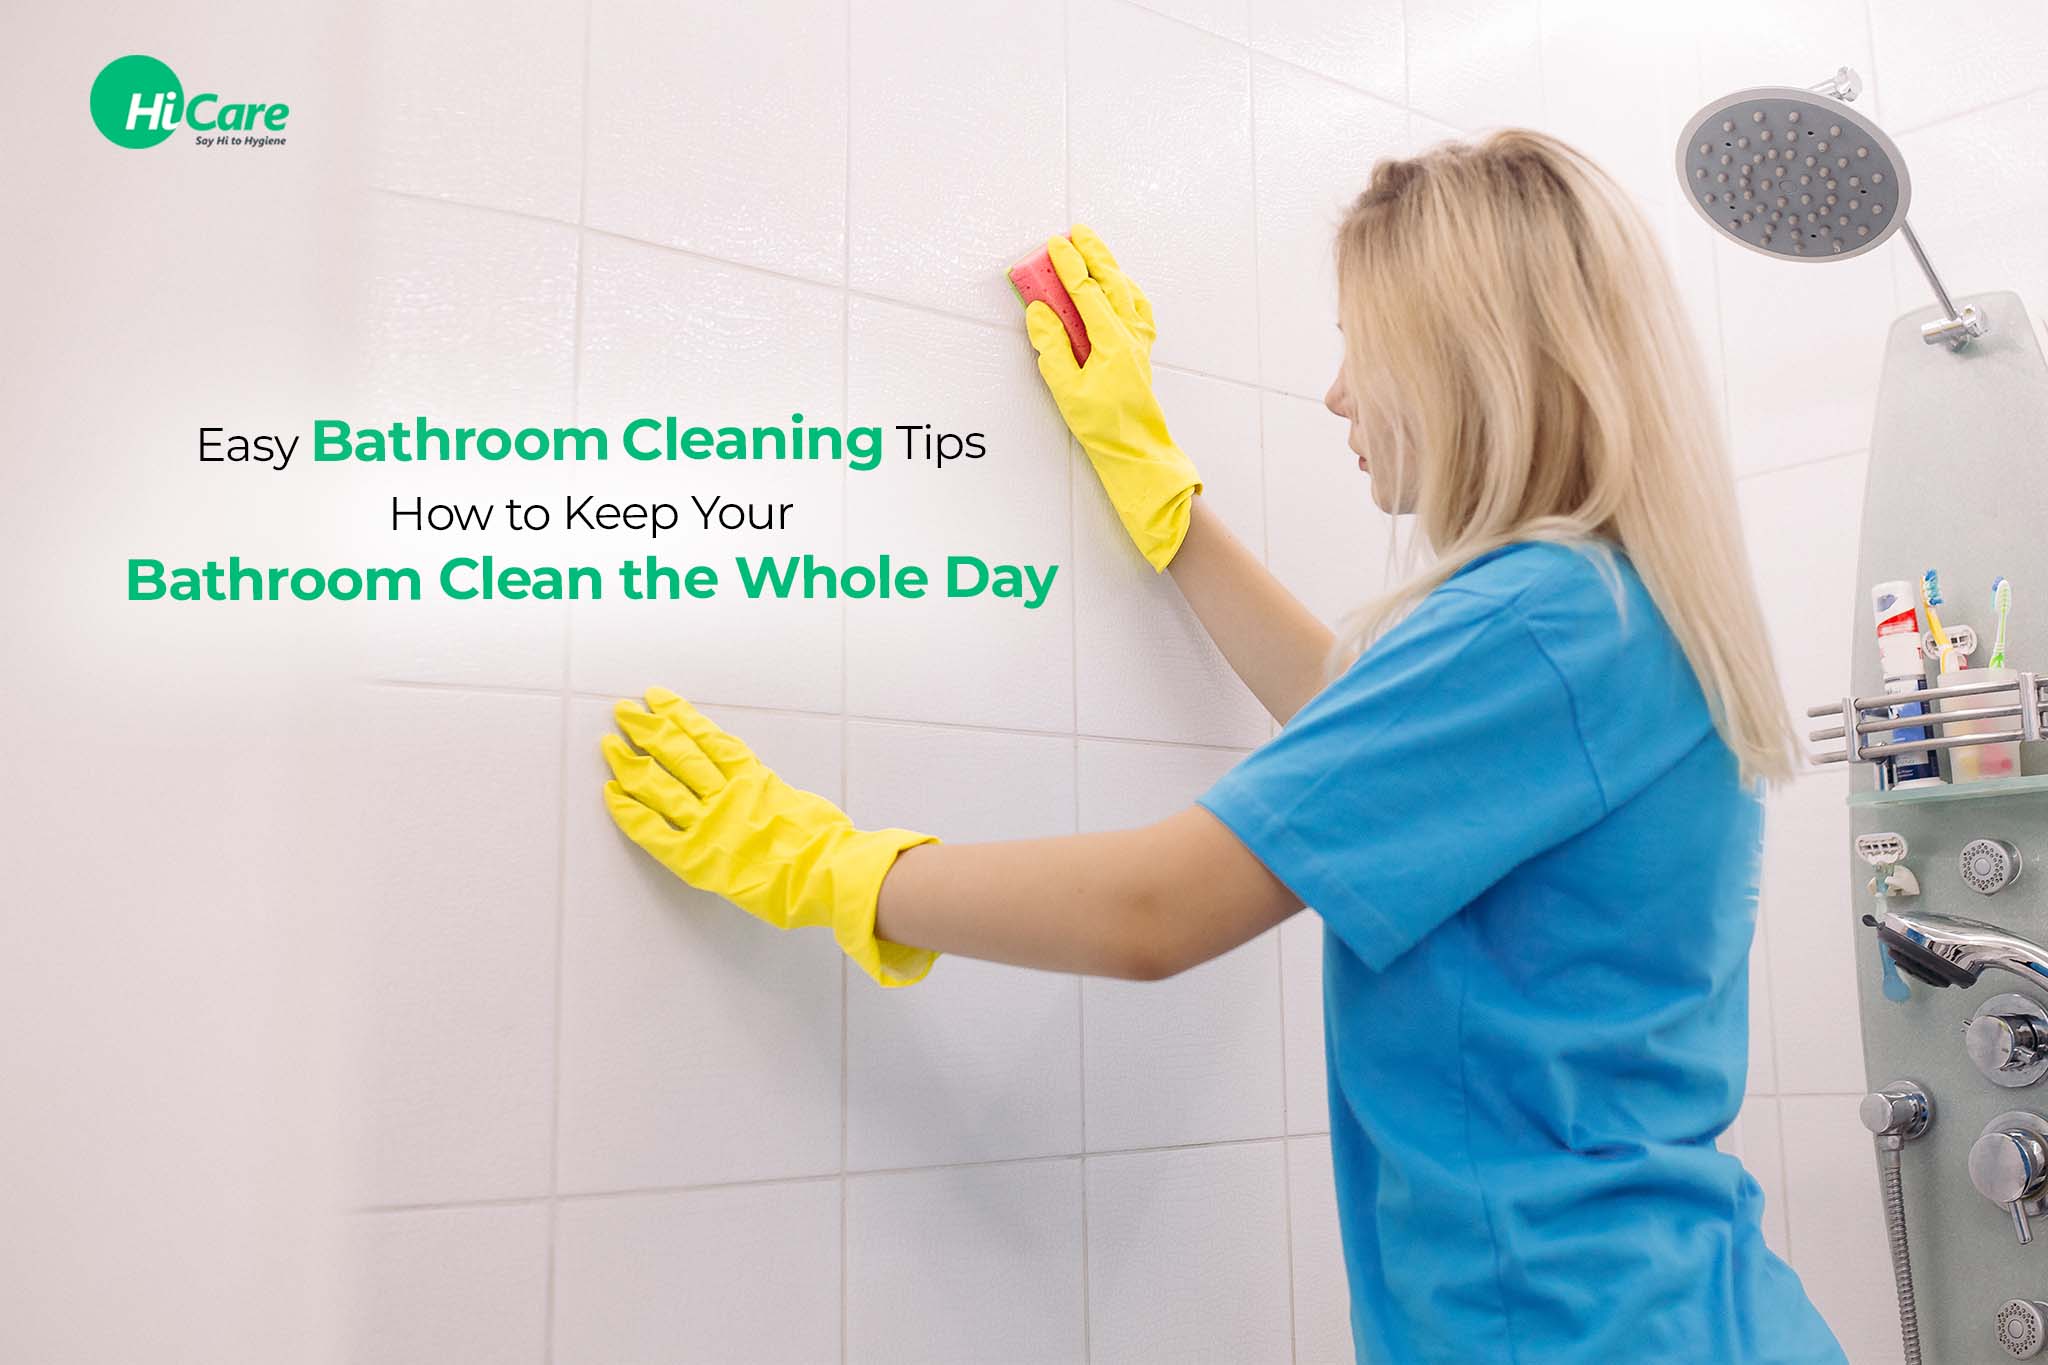 Easy Bathroom Cleaning Tips: How to Keep Your Bathroom Clean the Whole Day